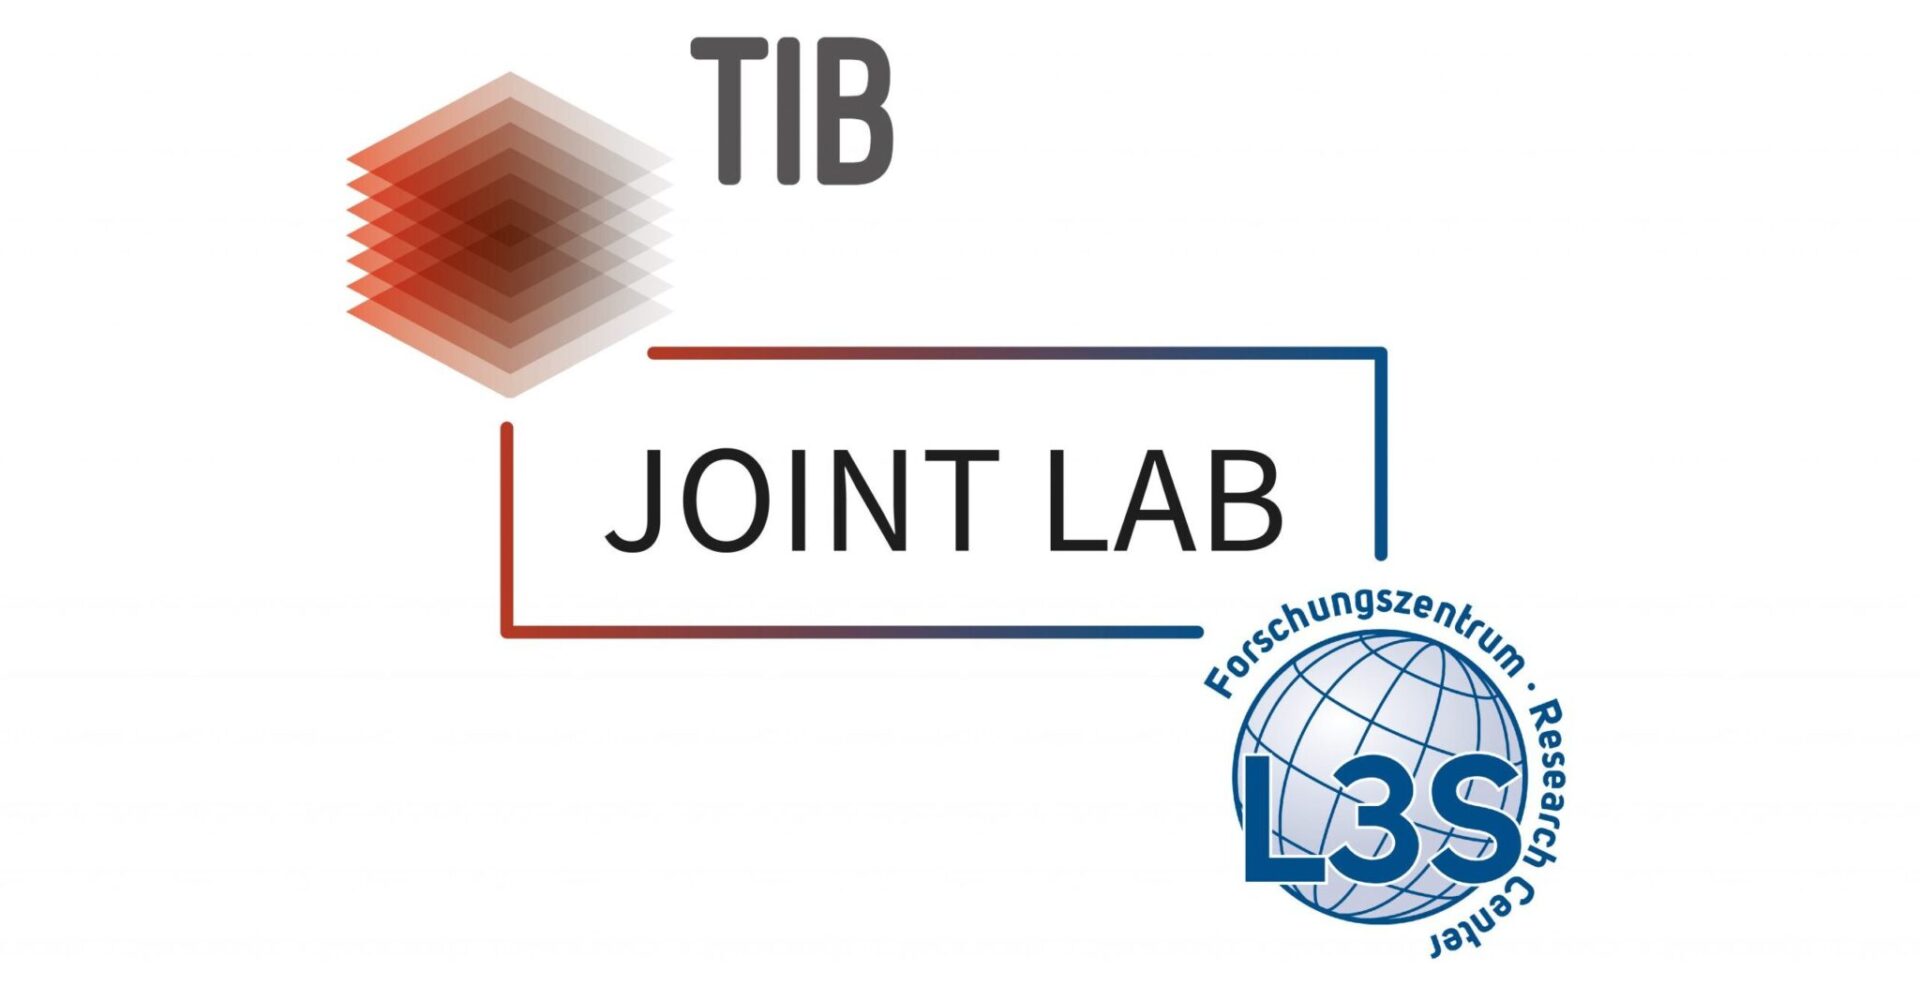 Closely linked partners: L3S and TIB